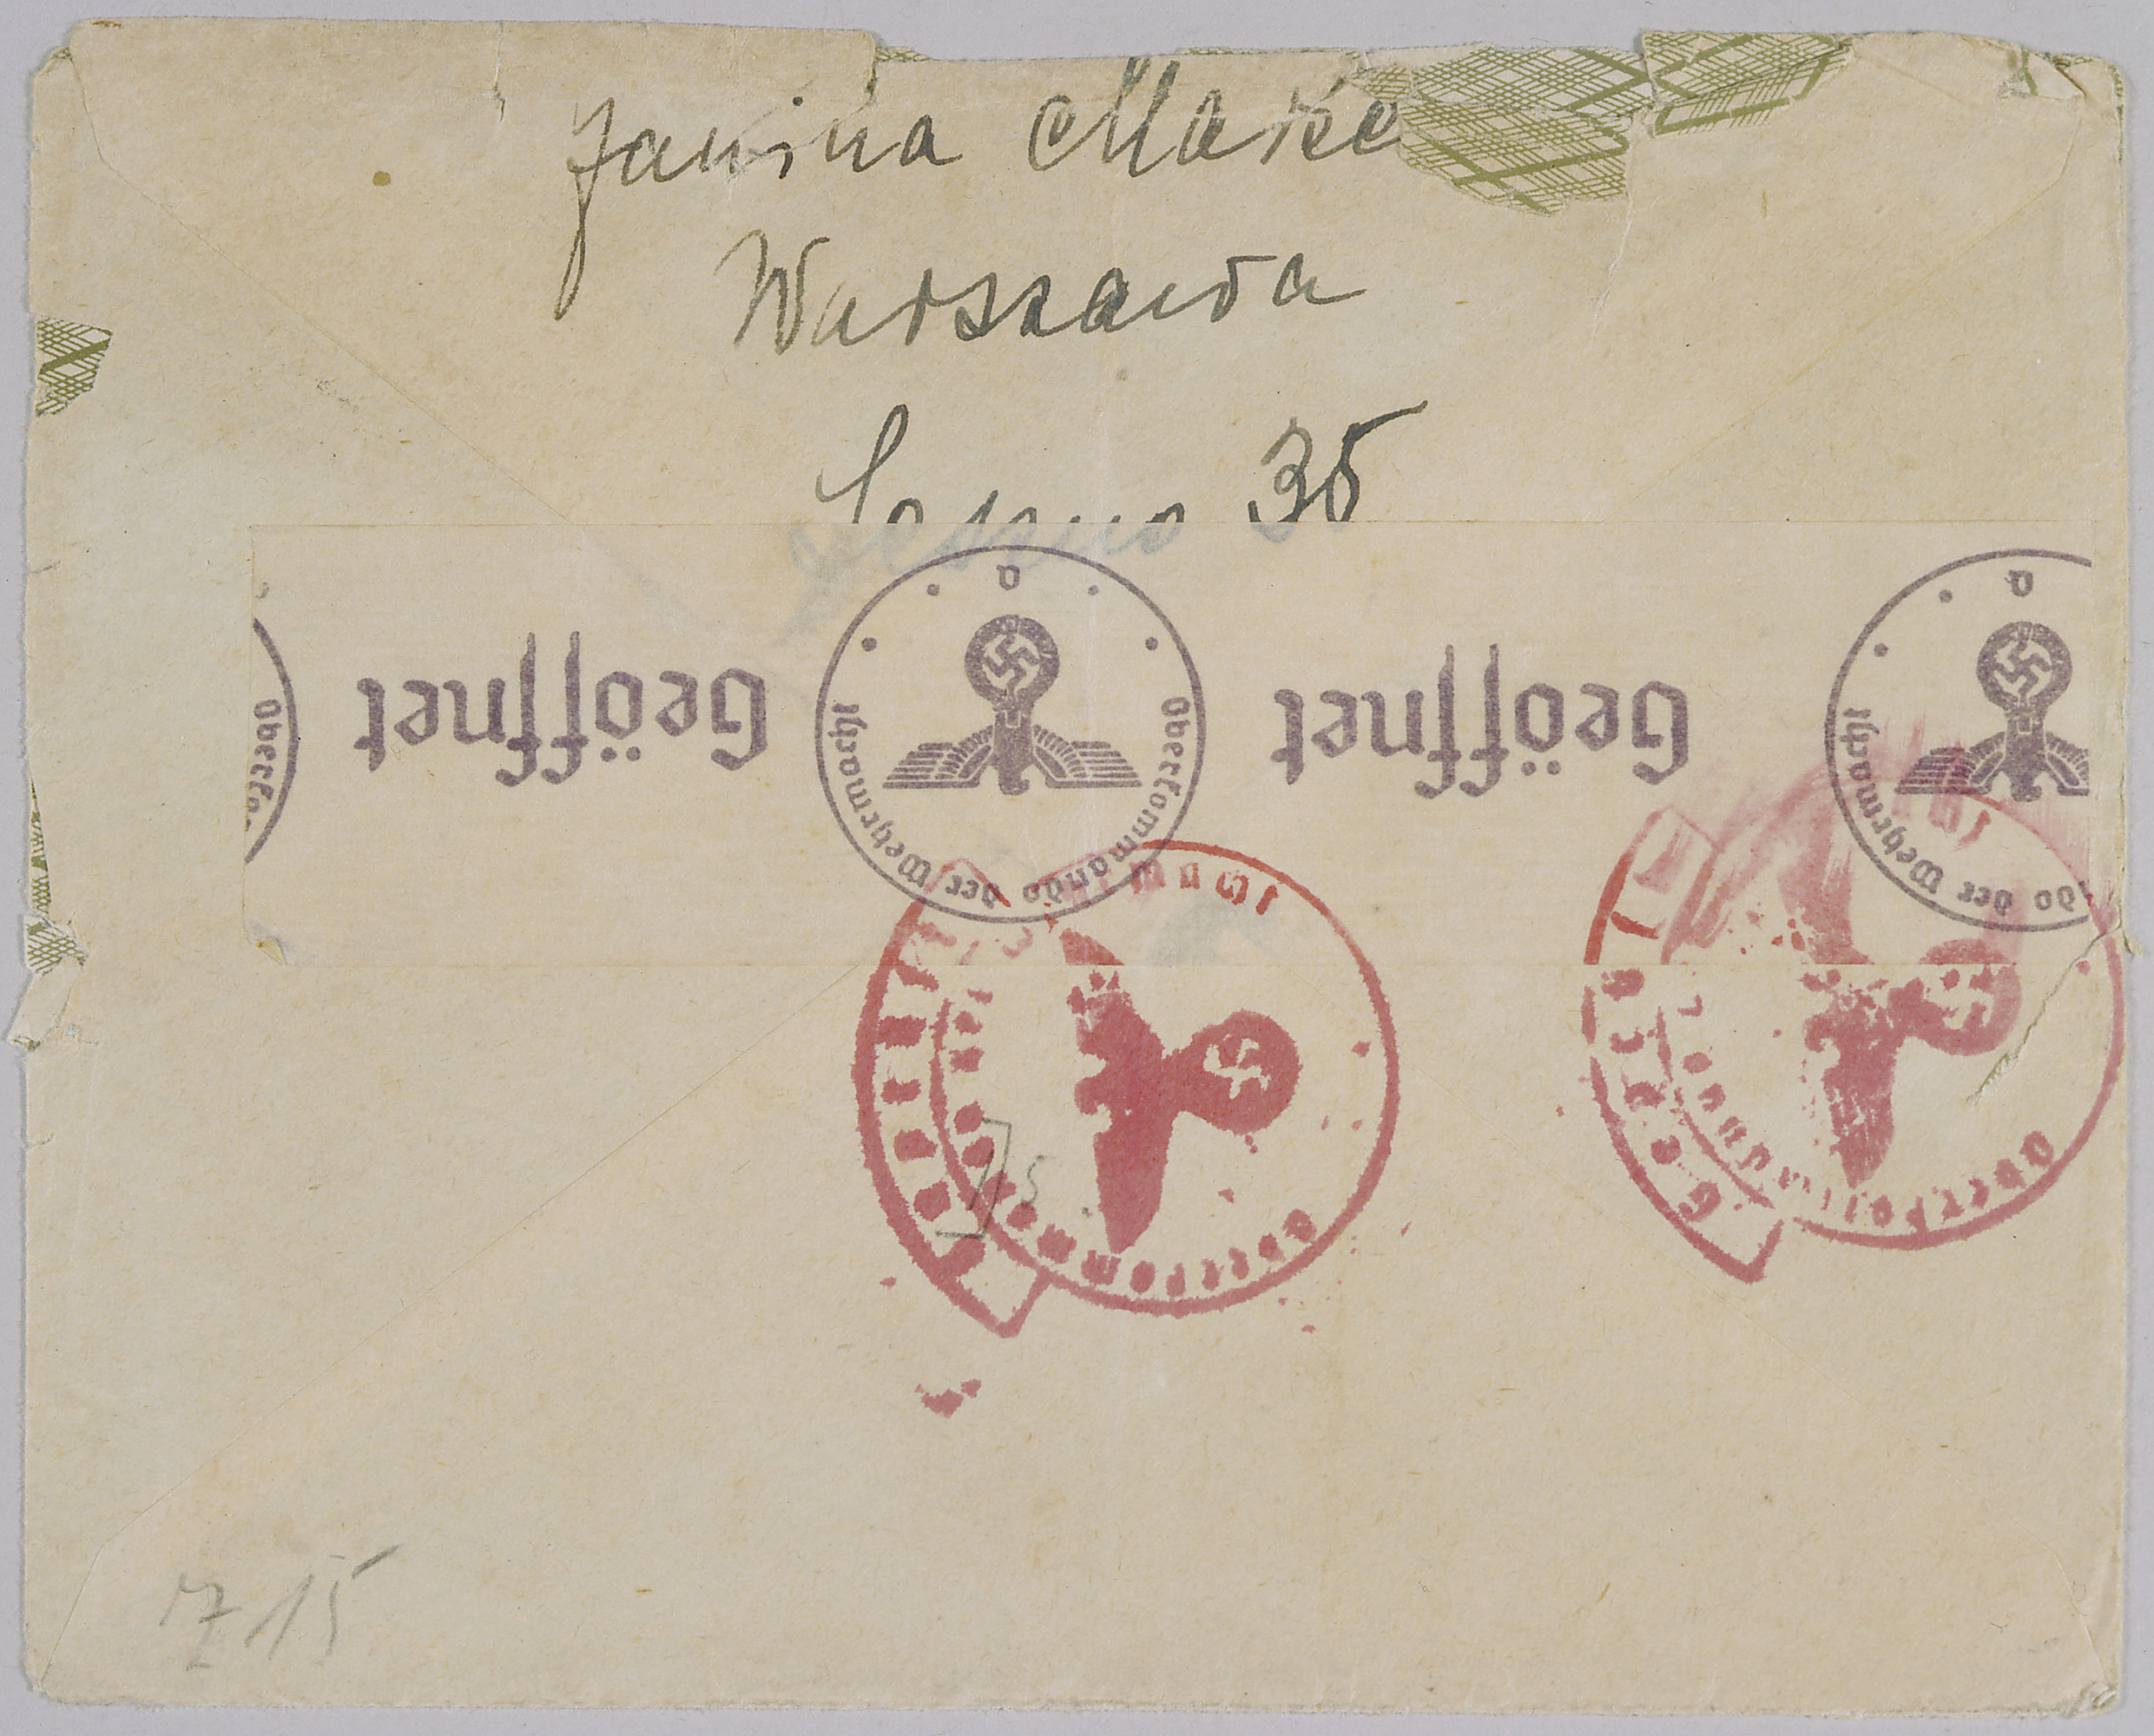 Verso of an envelope containing a letter sent from Warsaw to New York. It shows multiple German censor stamps, including paper stamps as well as ink stamp cancellations.